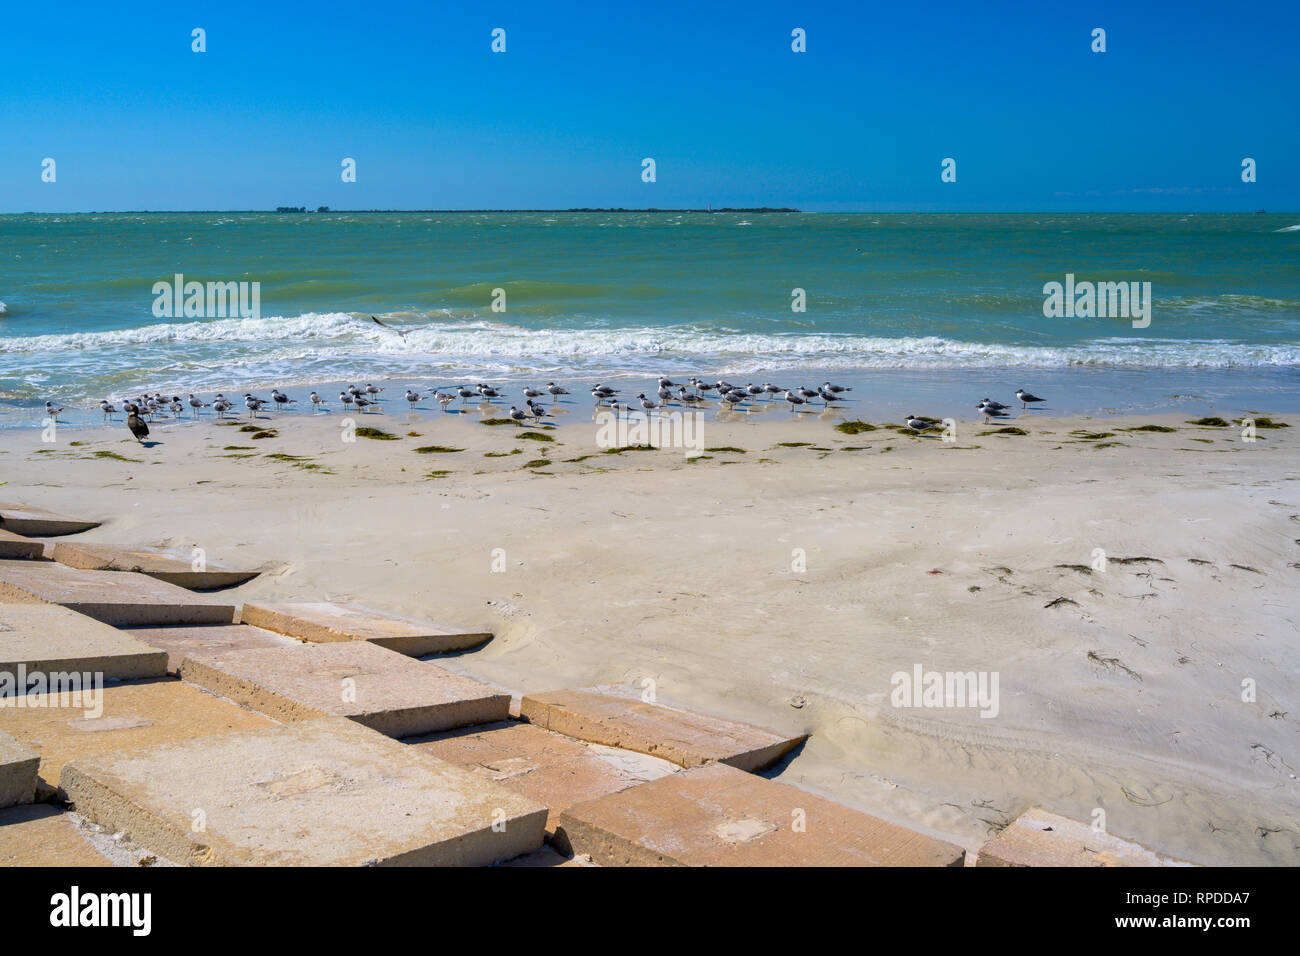 A wide-angle shot of seagulls lined up on a beach near a seawall. Stock Photo